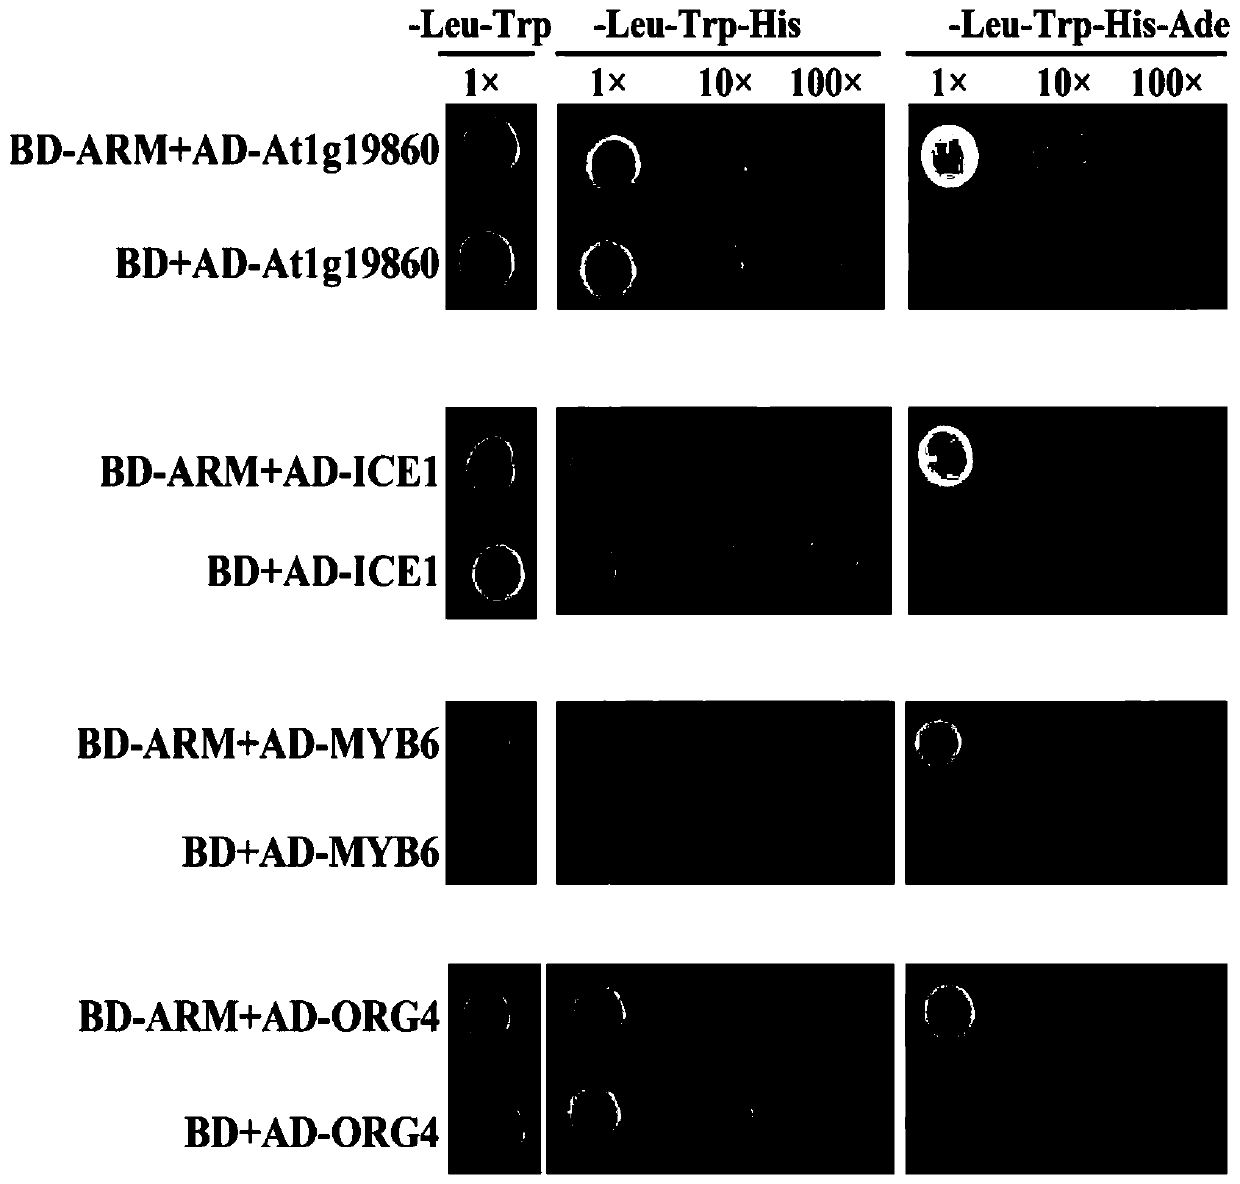 Application of MYB6 protein and coding gene thereof in regulating verticillium wilt resistance of plants